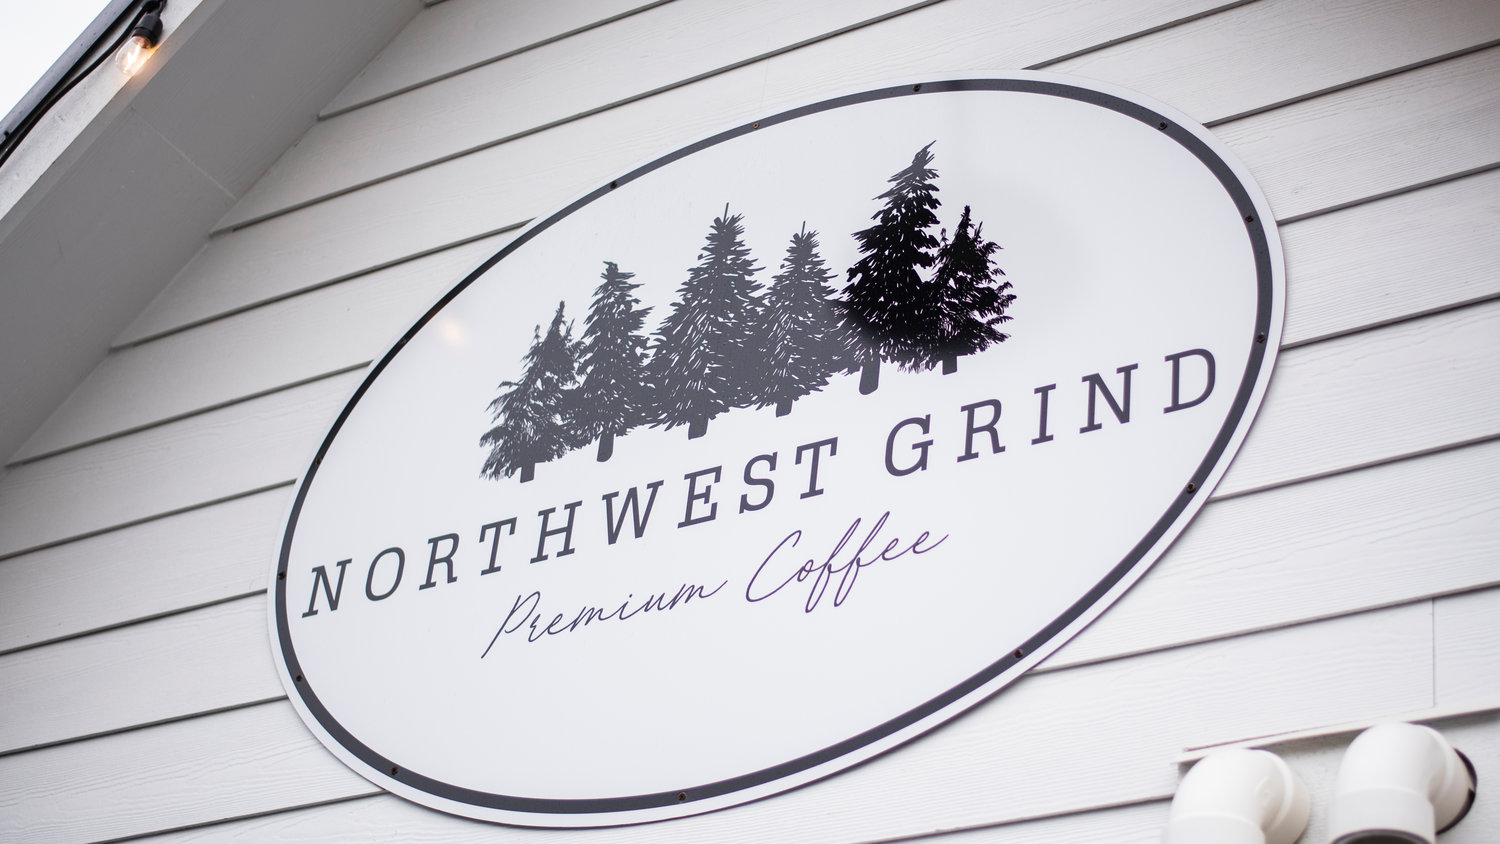 Signage for Northwest Grind hangs on display Tuesday morning.